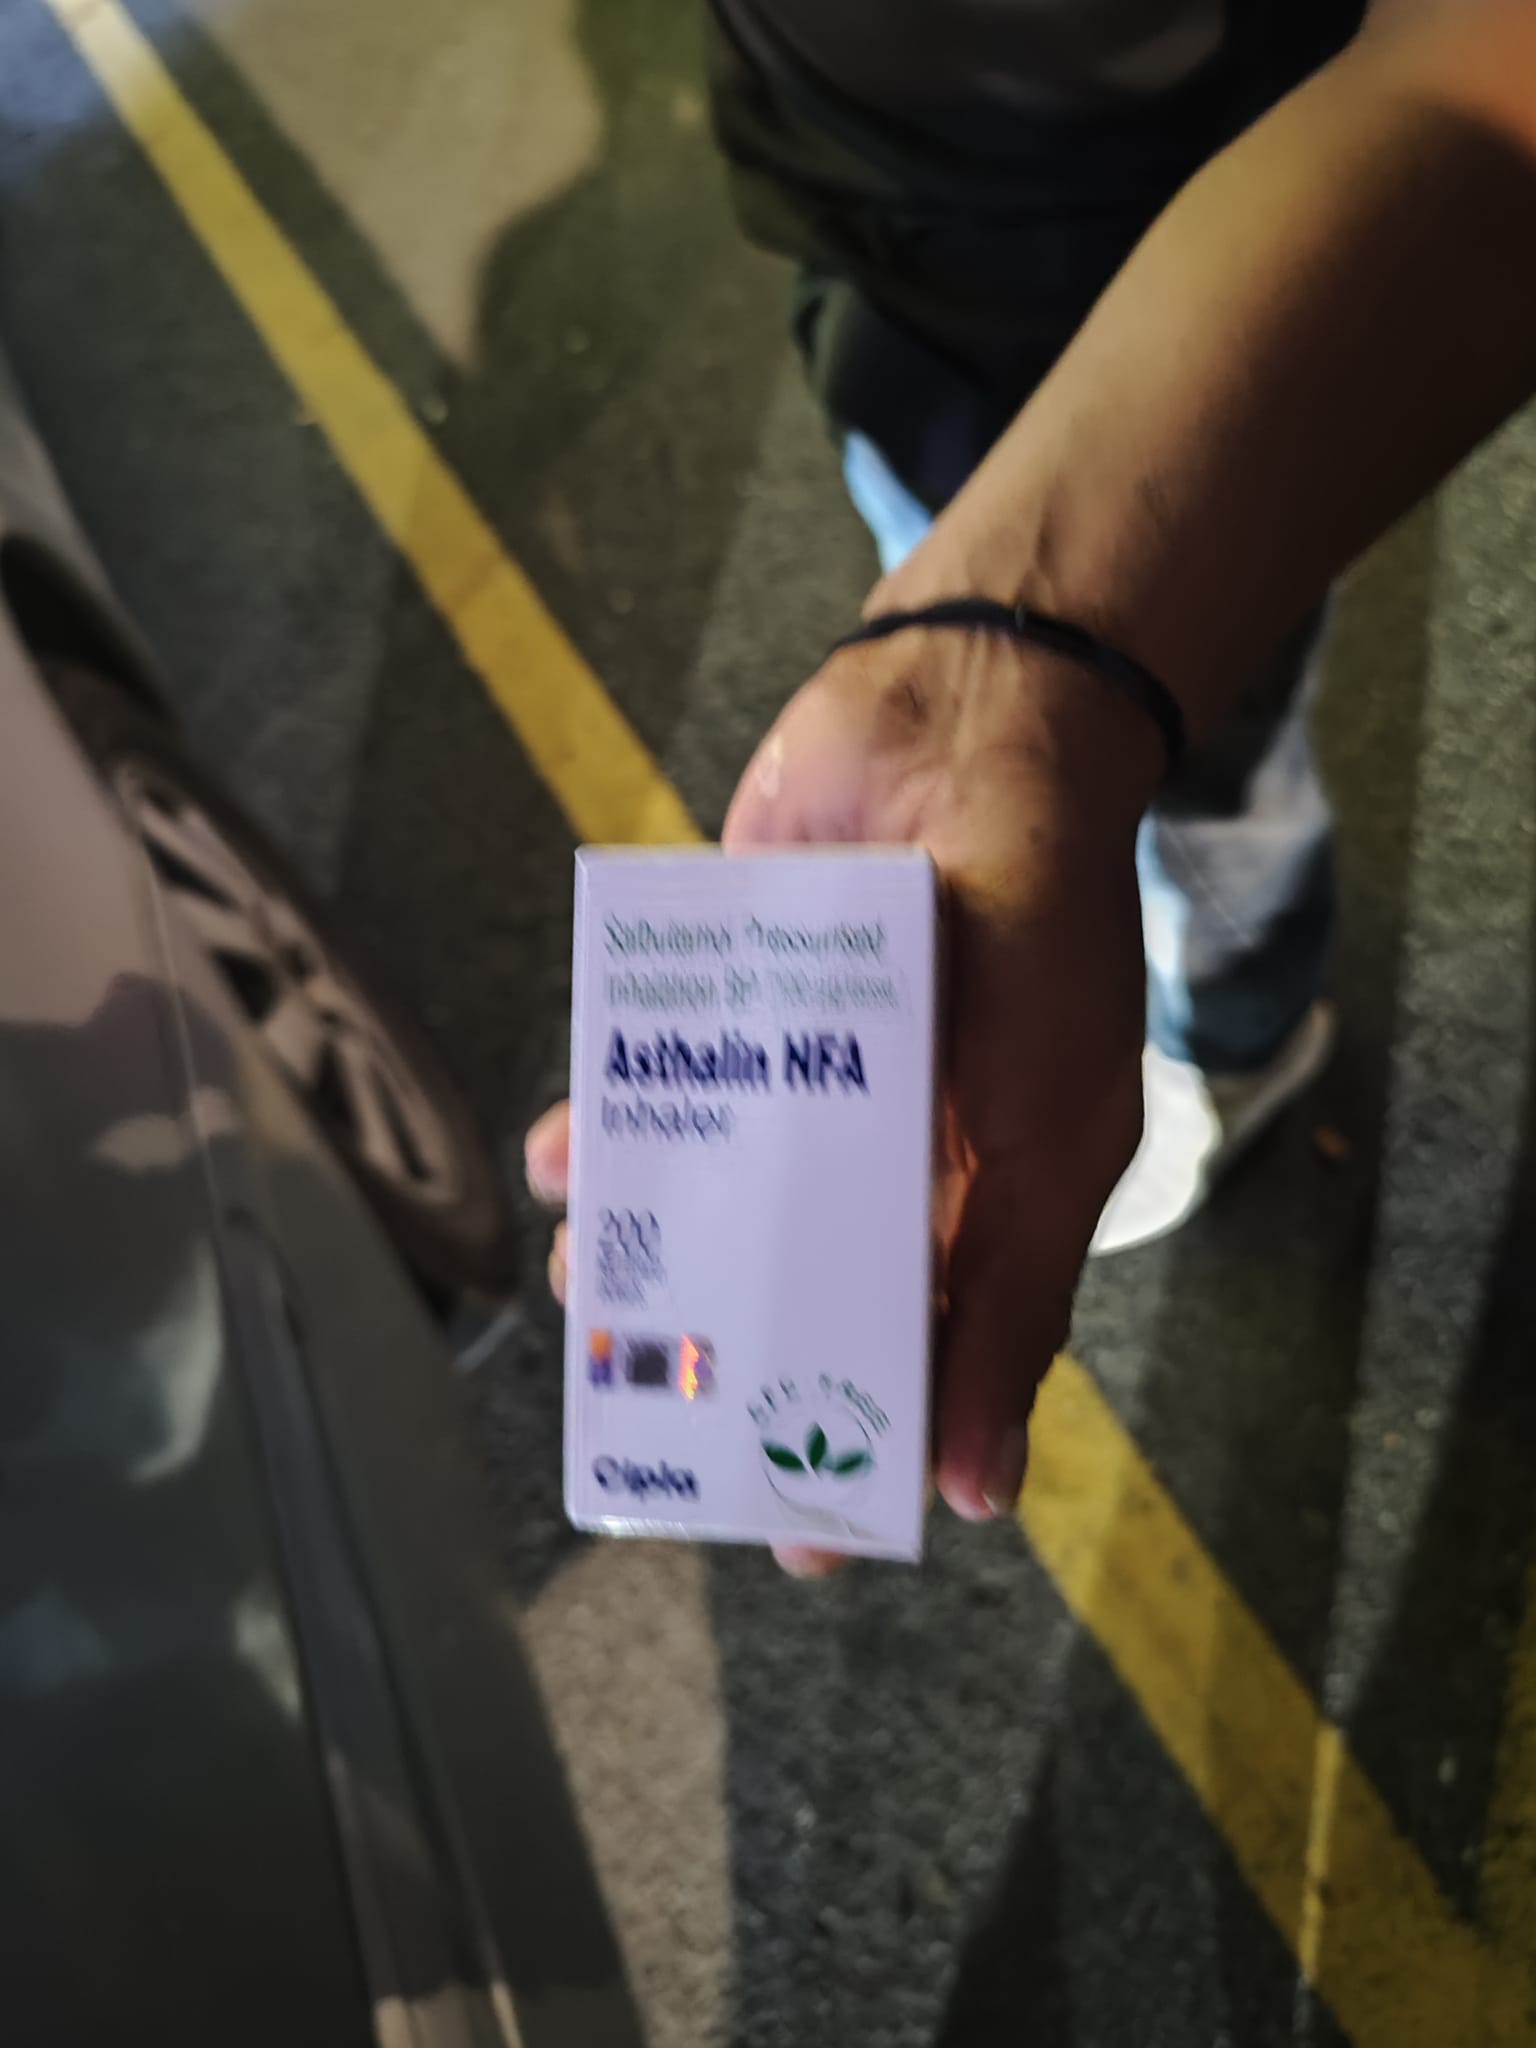 A Facebook netizen gave a foreign worker RM10 to help him buy asthma medicine. Image credit: Albert Ling